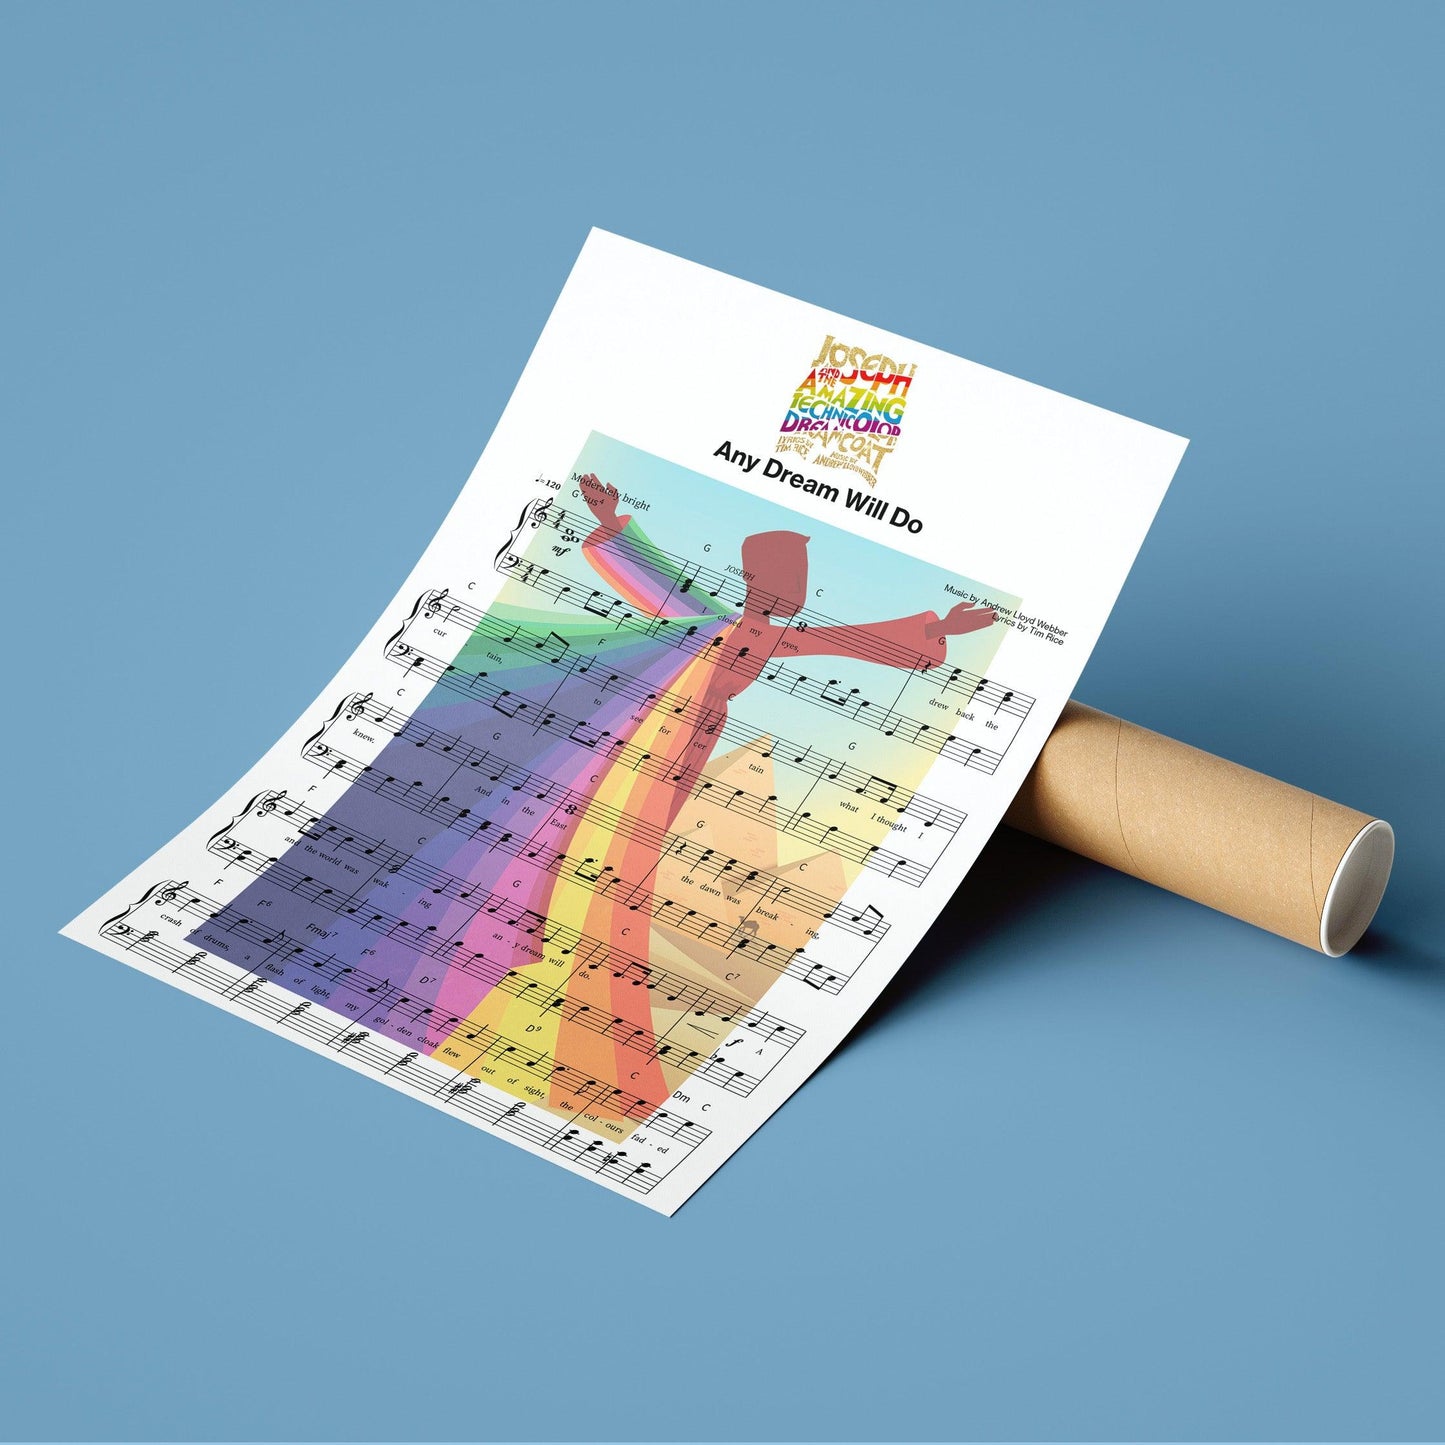 Joseph - Any Dream Will Do Song Print | Song Music Sheet Notes Print Everyone has a favorite song especially Joseph Print, and now you can show the score as printed staff. The personal favorite song sheet print shows the song chosen as the score. 